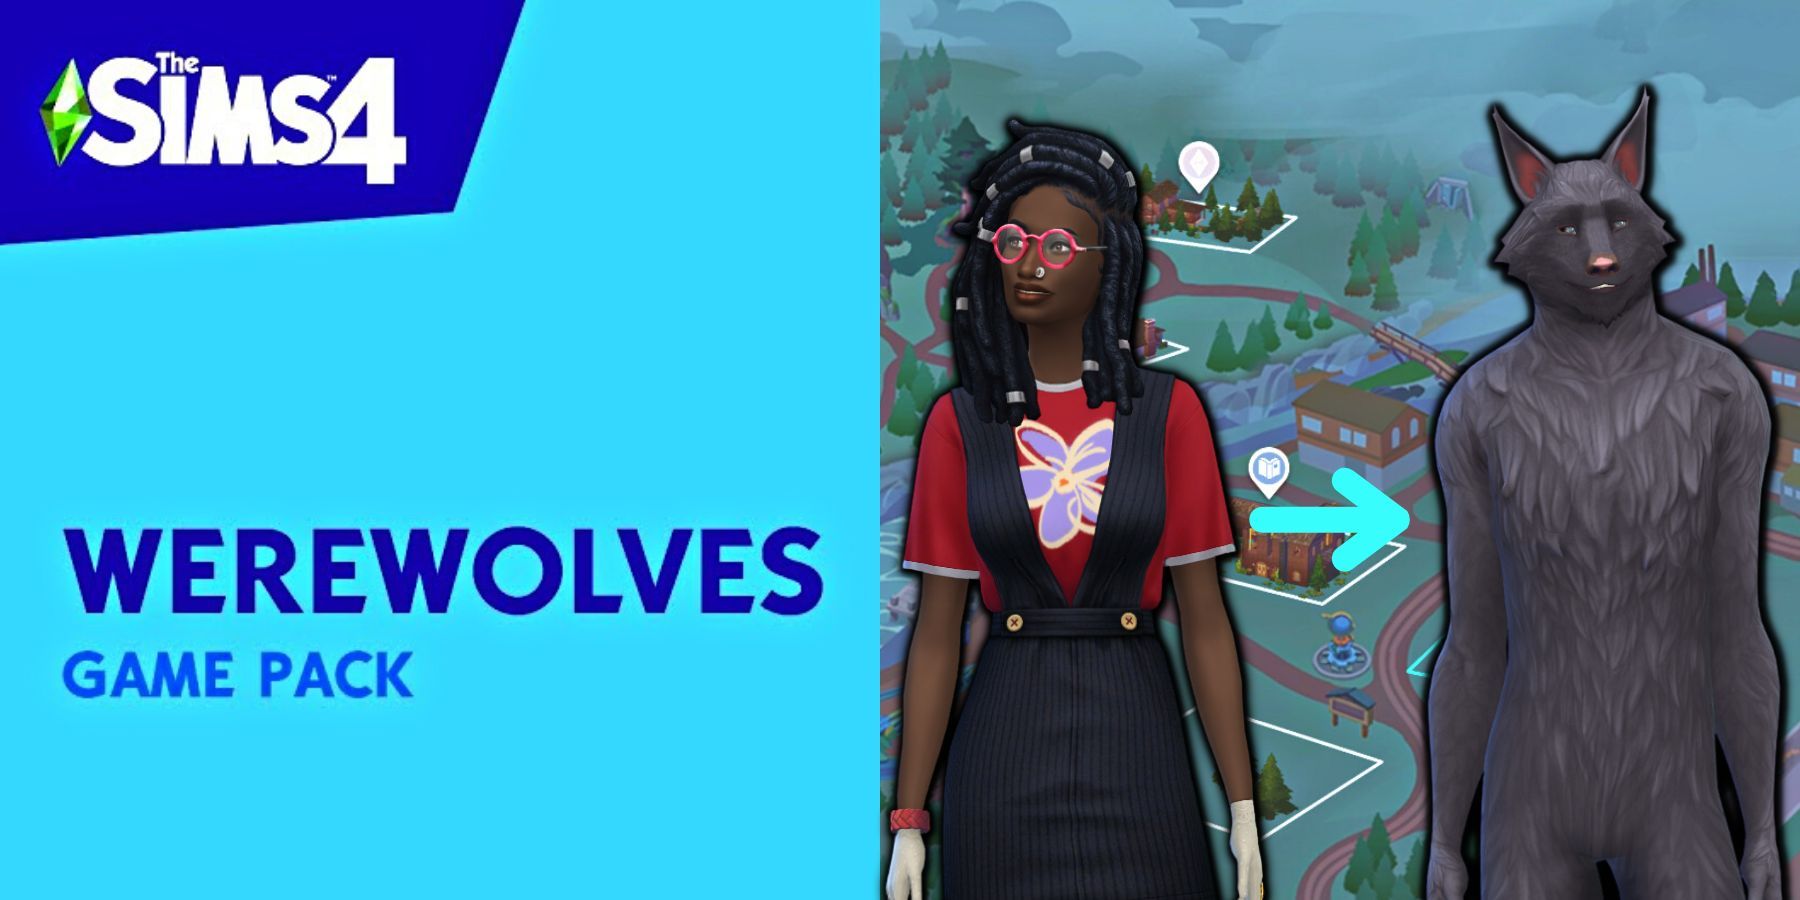 The Sims 4 Werewolves